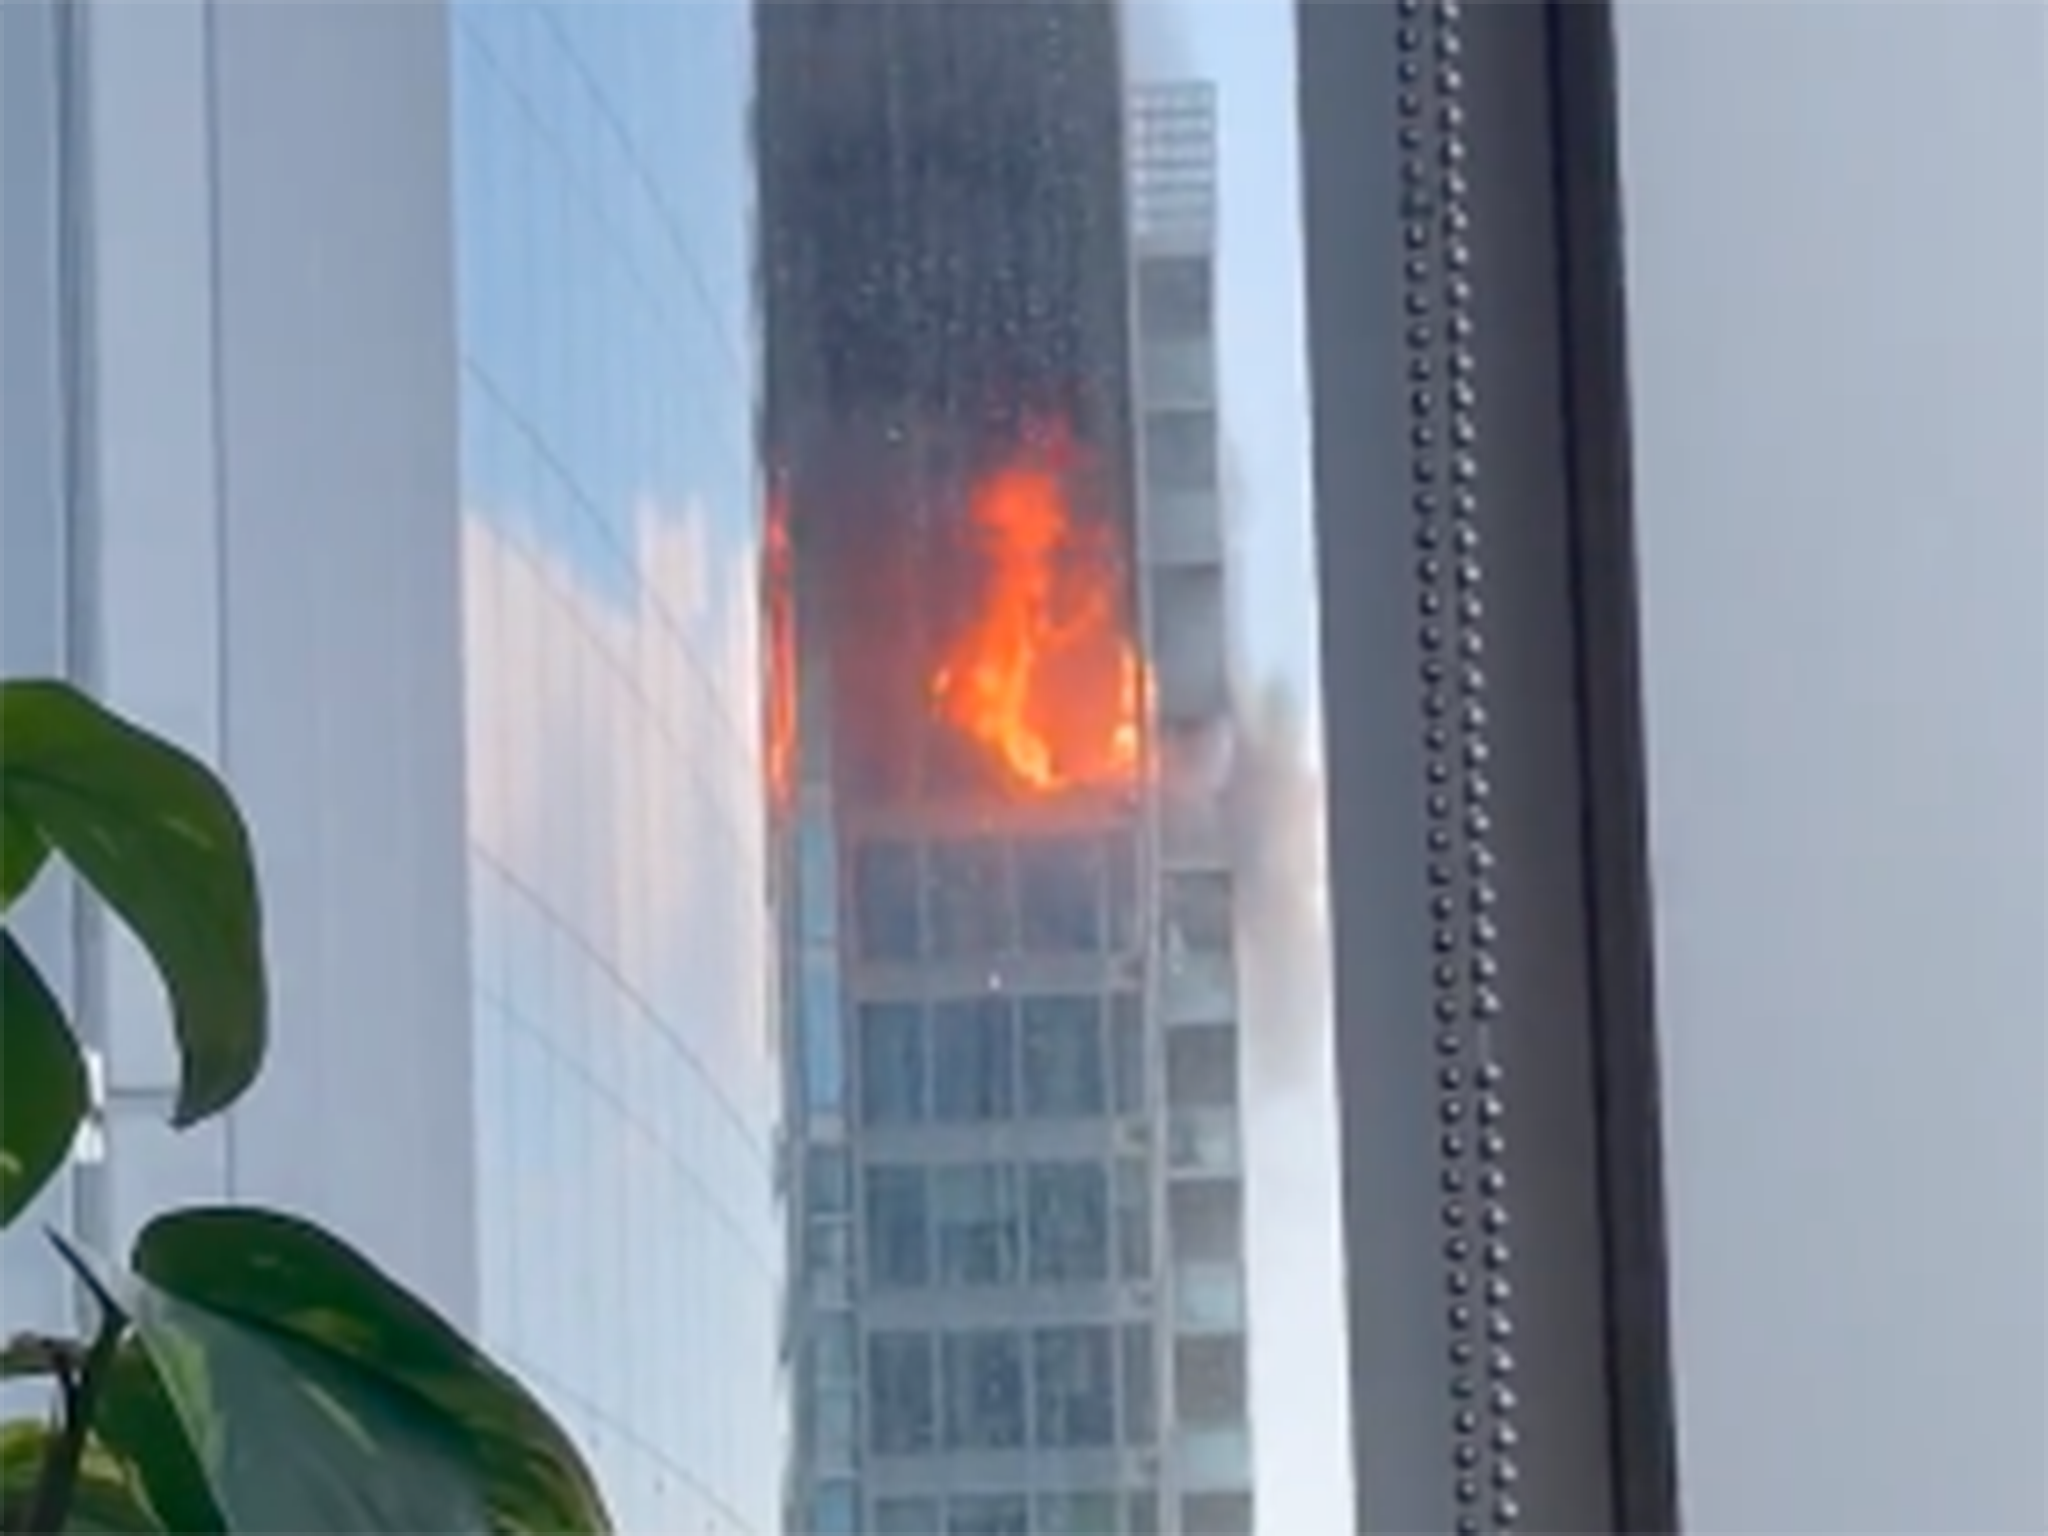 The fire broke out on the 17th floor